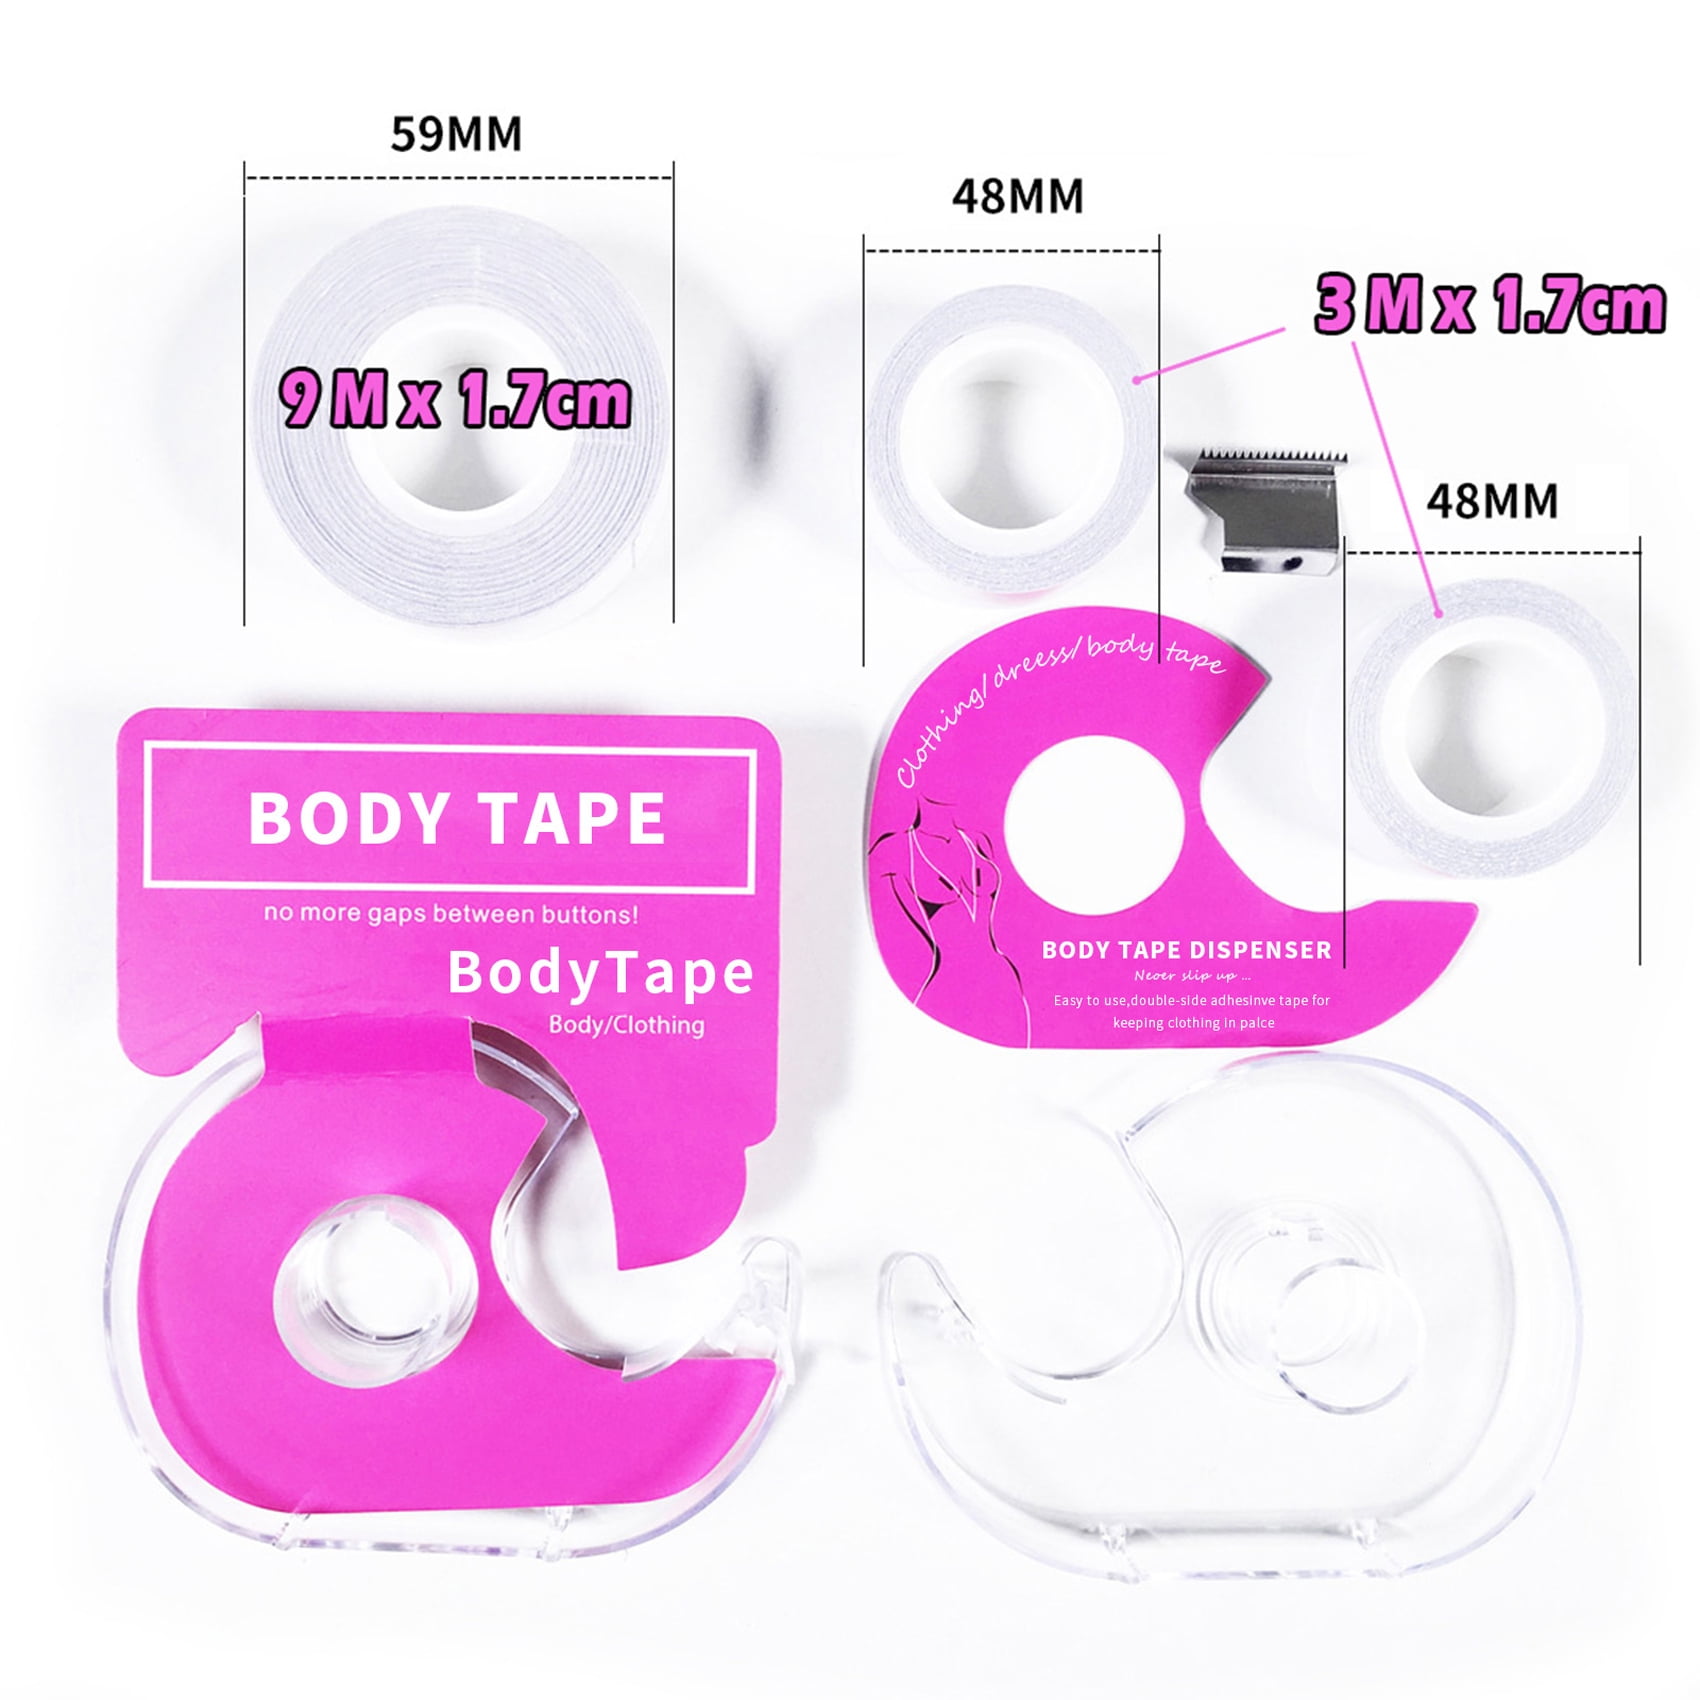 1 Piece 5 Meter Clothing Anti-Slip Double Sided Tape And Cutter,  Anti-Exposure Double Sided Stickers, Fabric Tape For Women'S Clothing And  Body, All Day Strength, Invisible Clear Tape For All Skin, Suitable